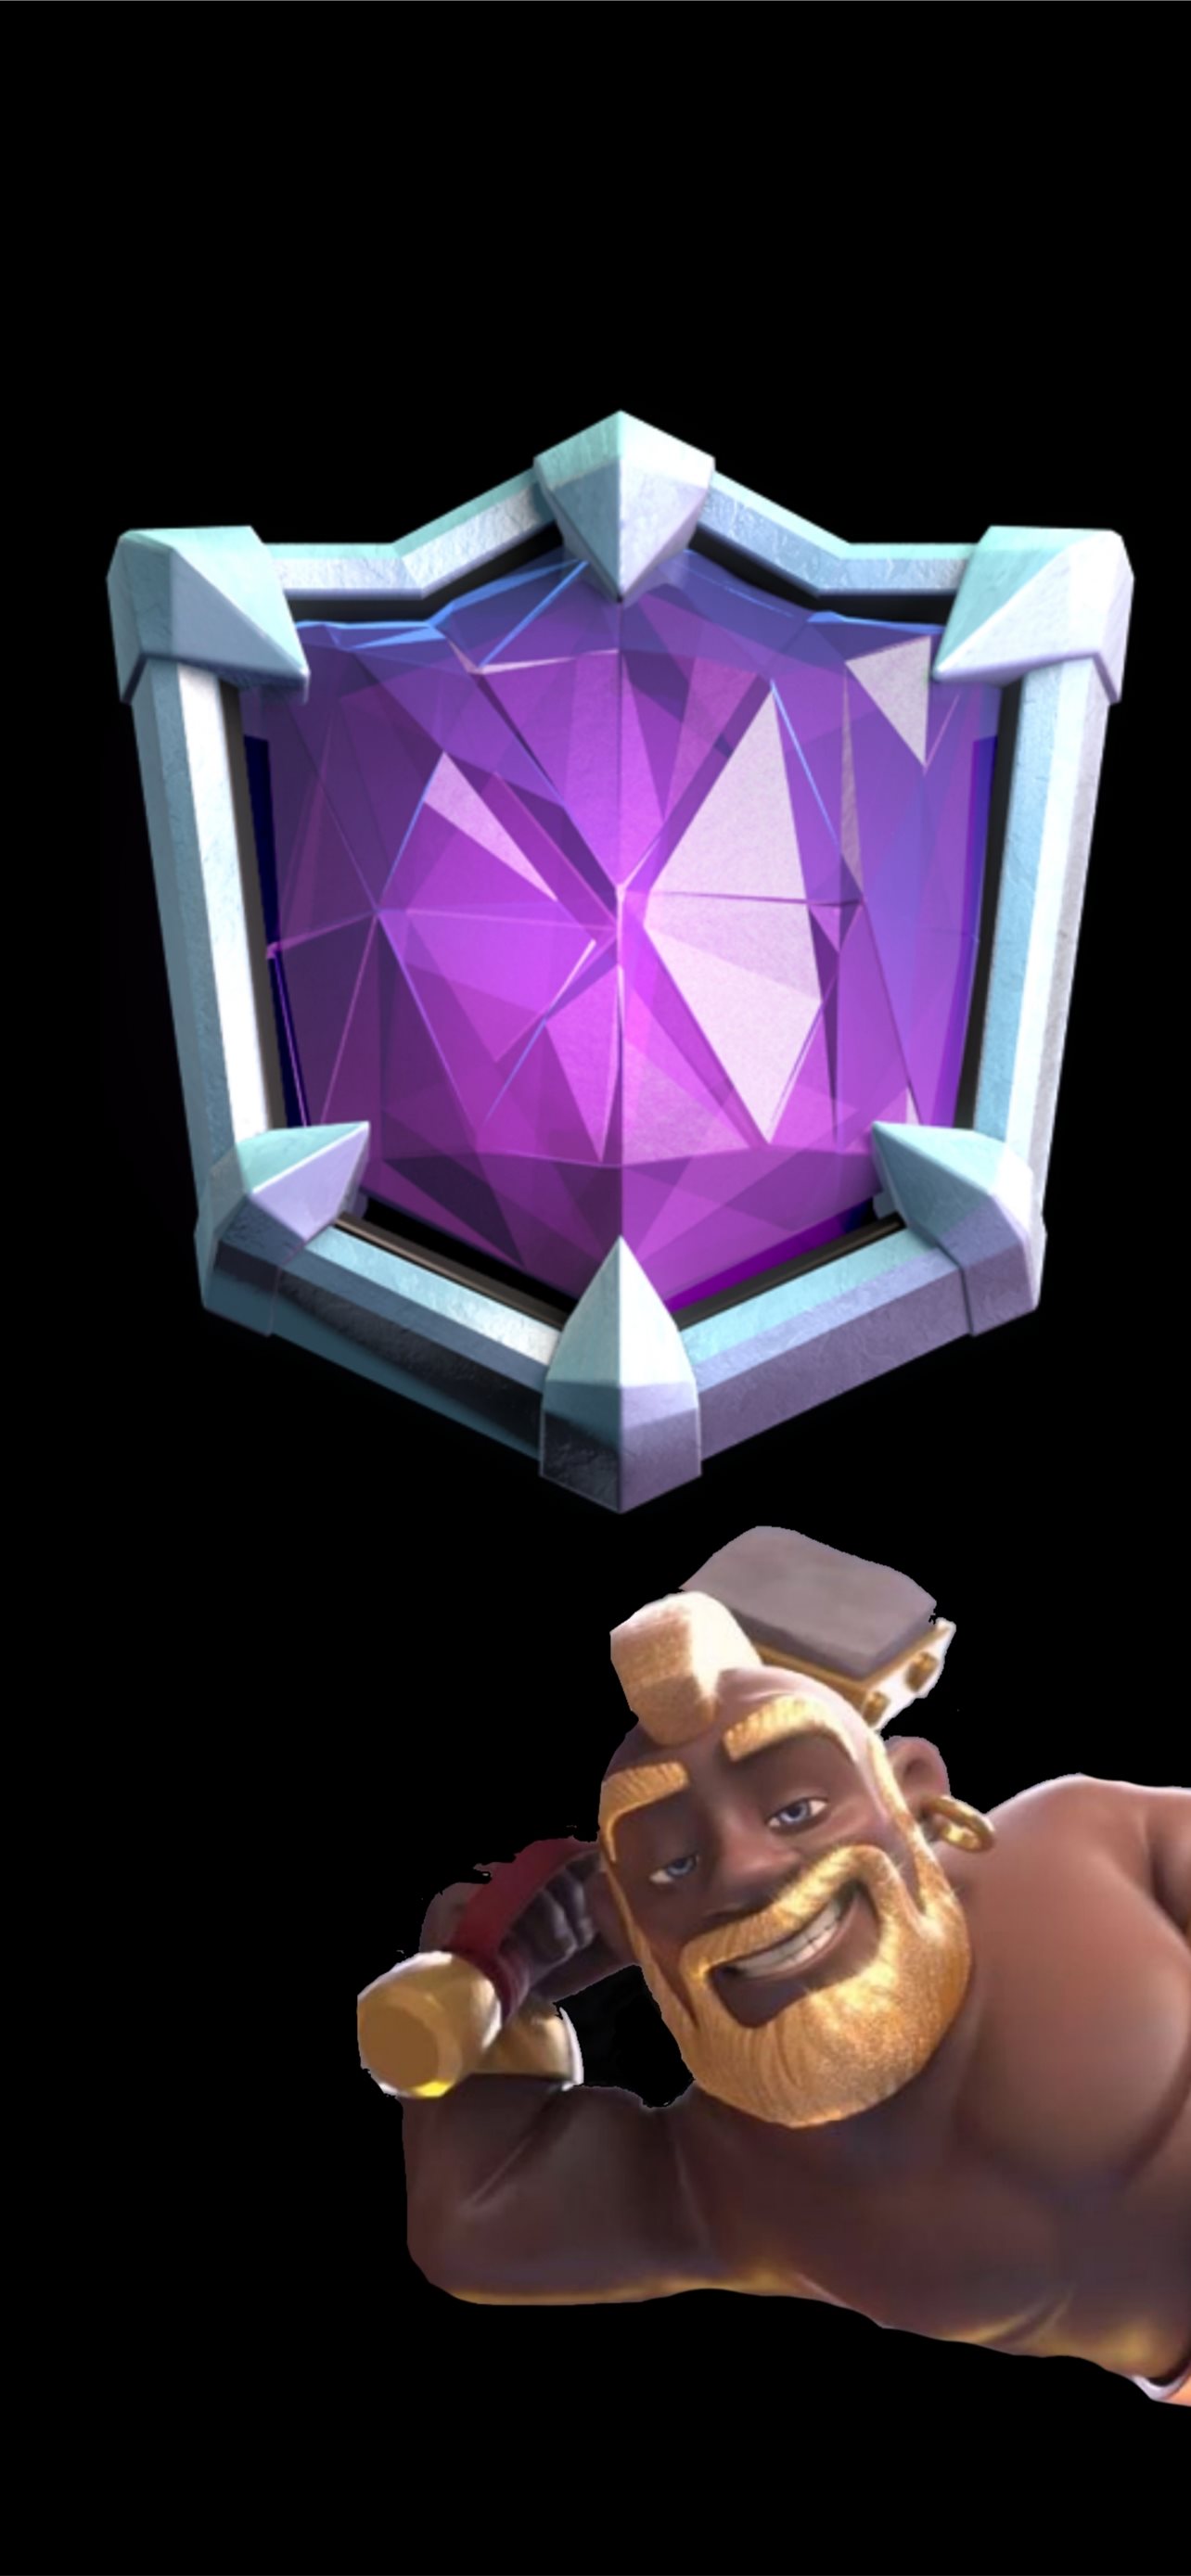 Clash Royale 2020 Wallpapers